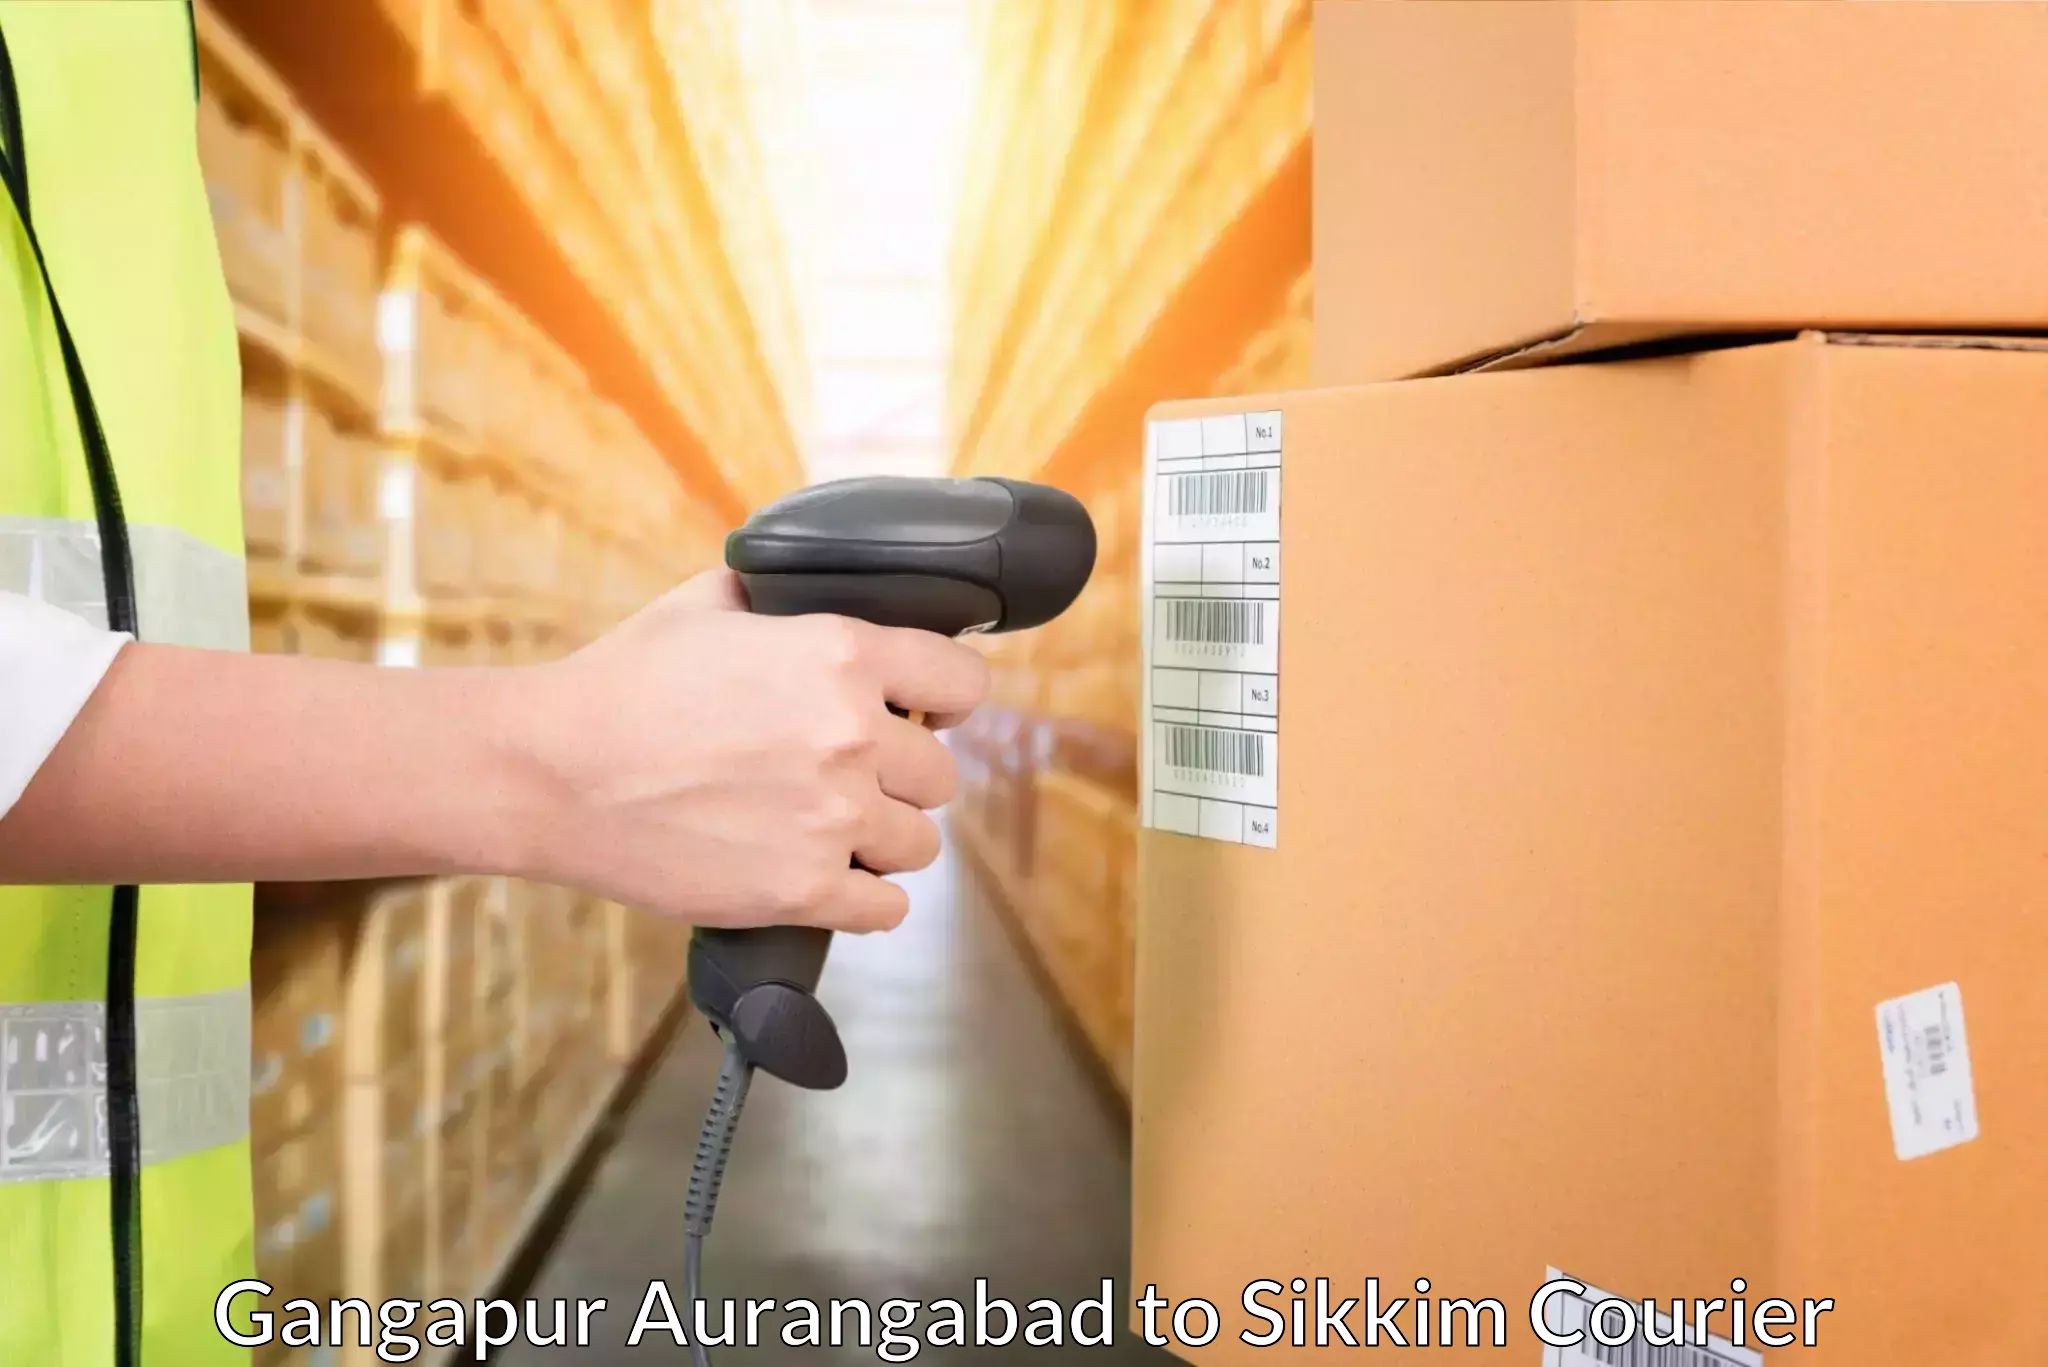 End-to-end delivery Gangapur Aurangabad to Ranipool